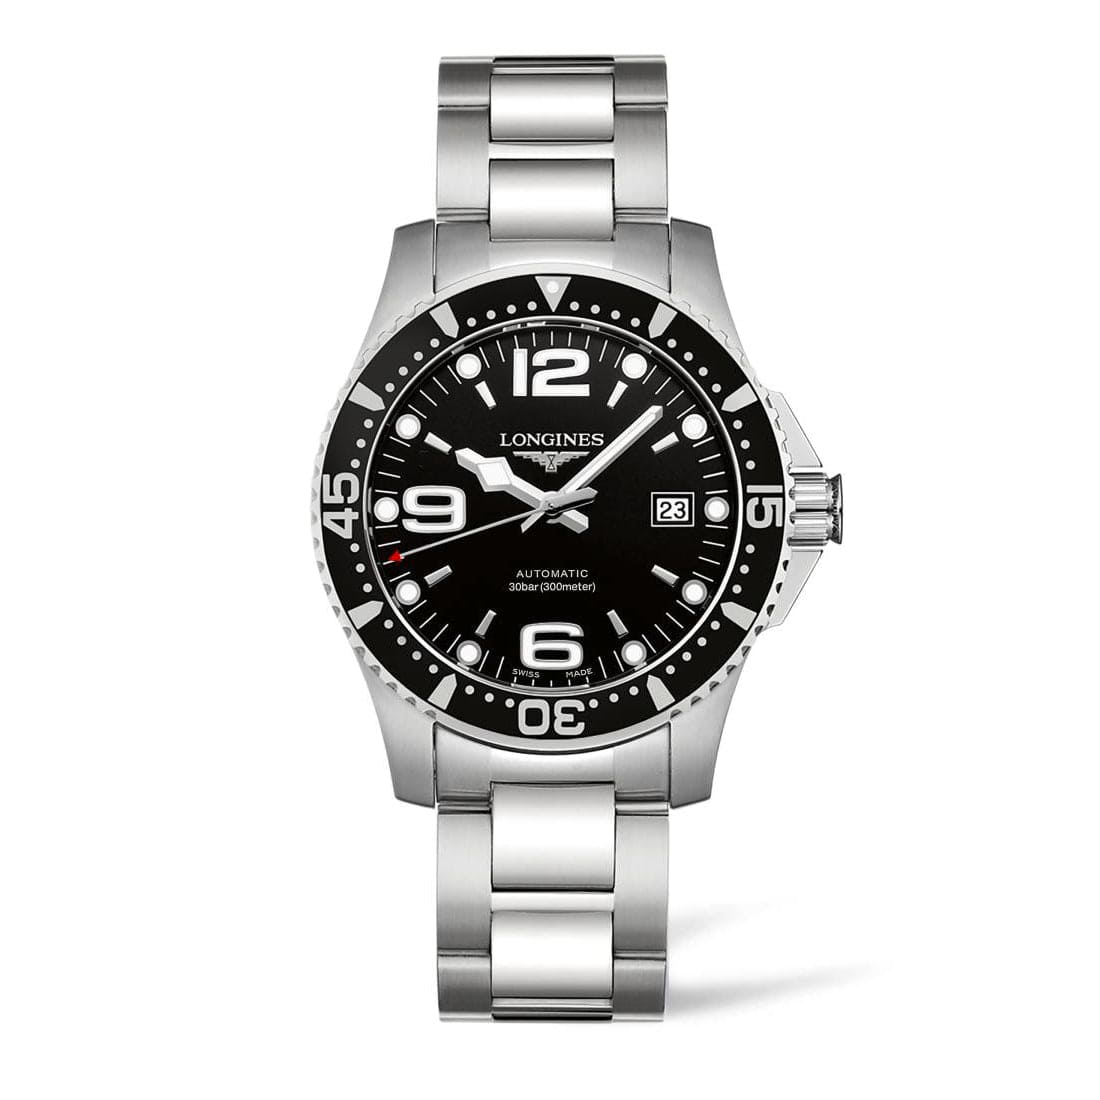 HydroConquest 41mm Automatic Diving Watch, Long's Jewelers